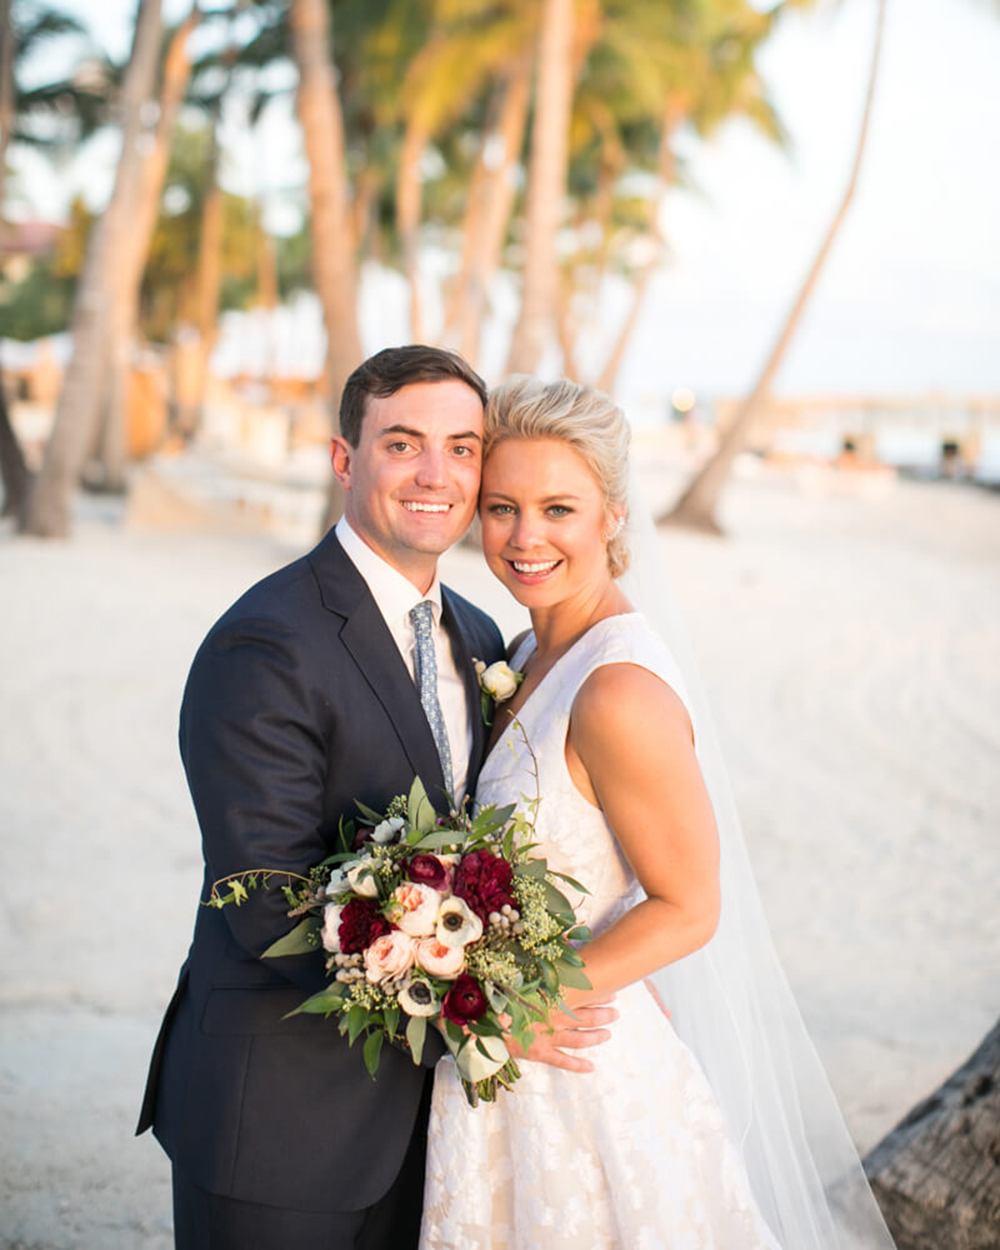 Samm and Sam’s Fall Floridian Wedding Day